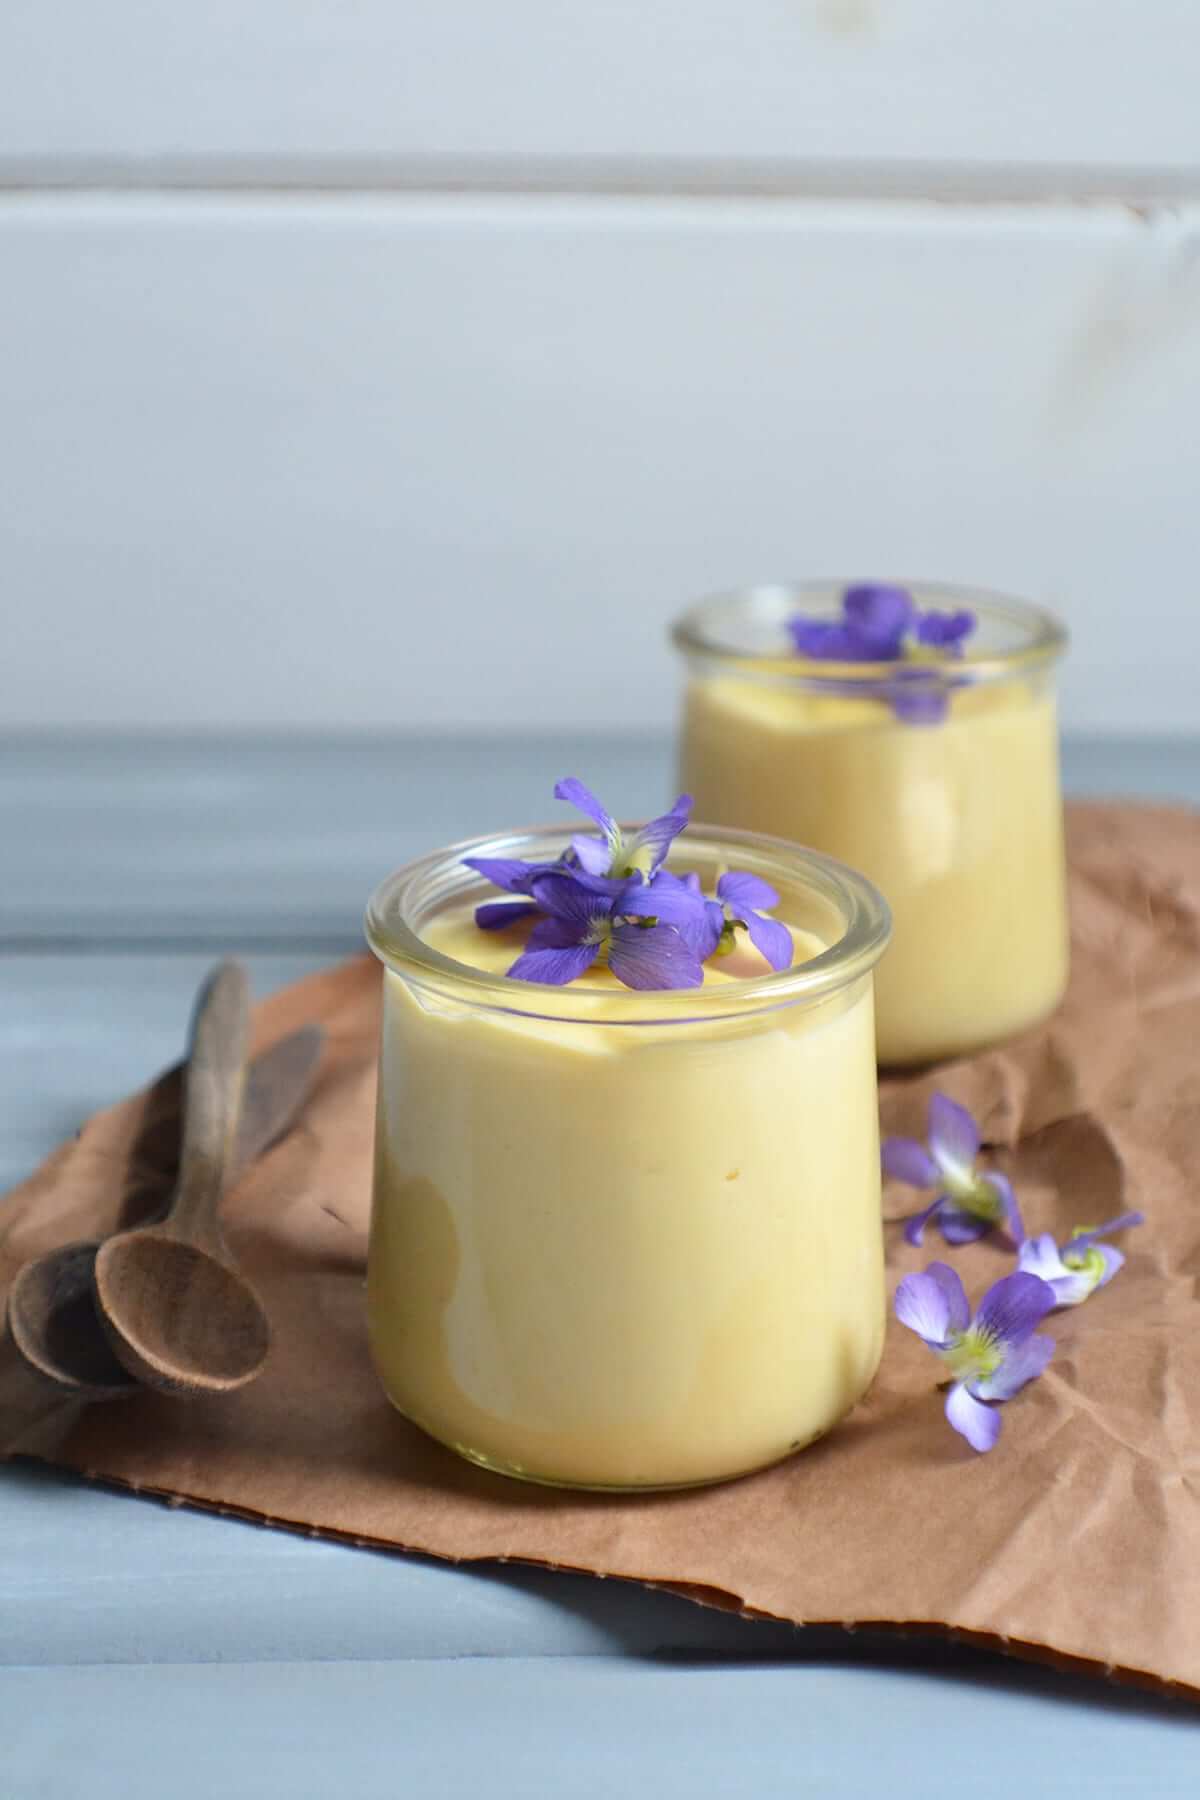 How to make floral infused violet pudding - The Herbal Spoon